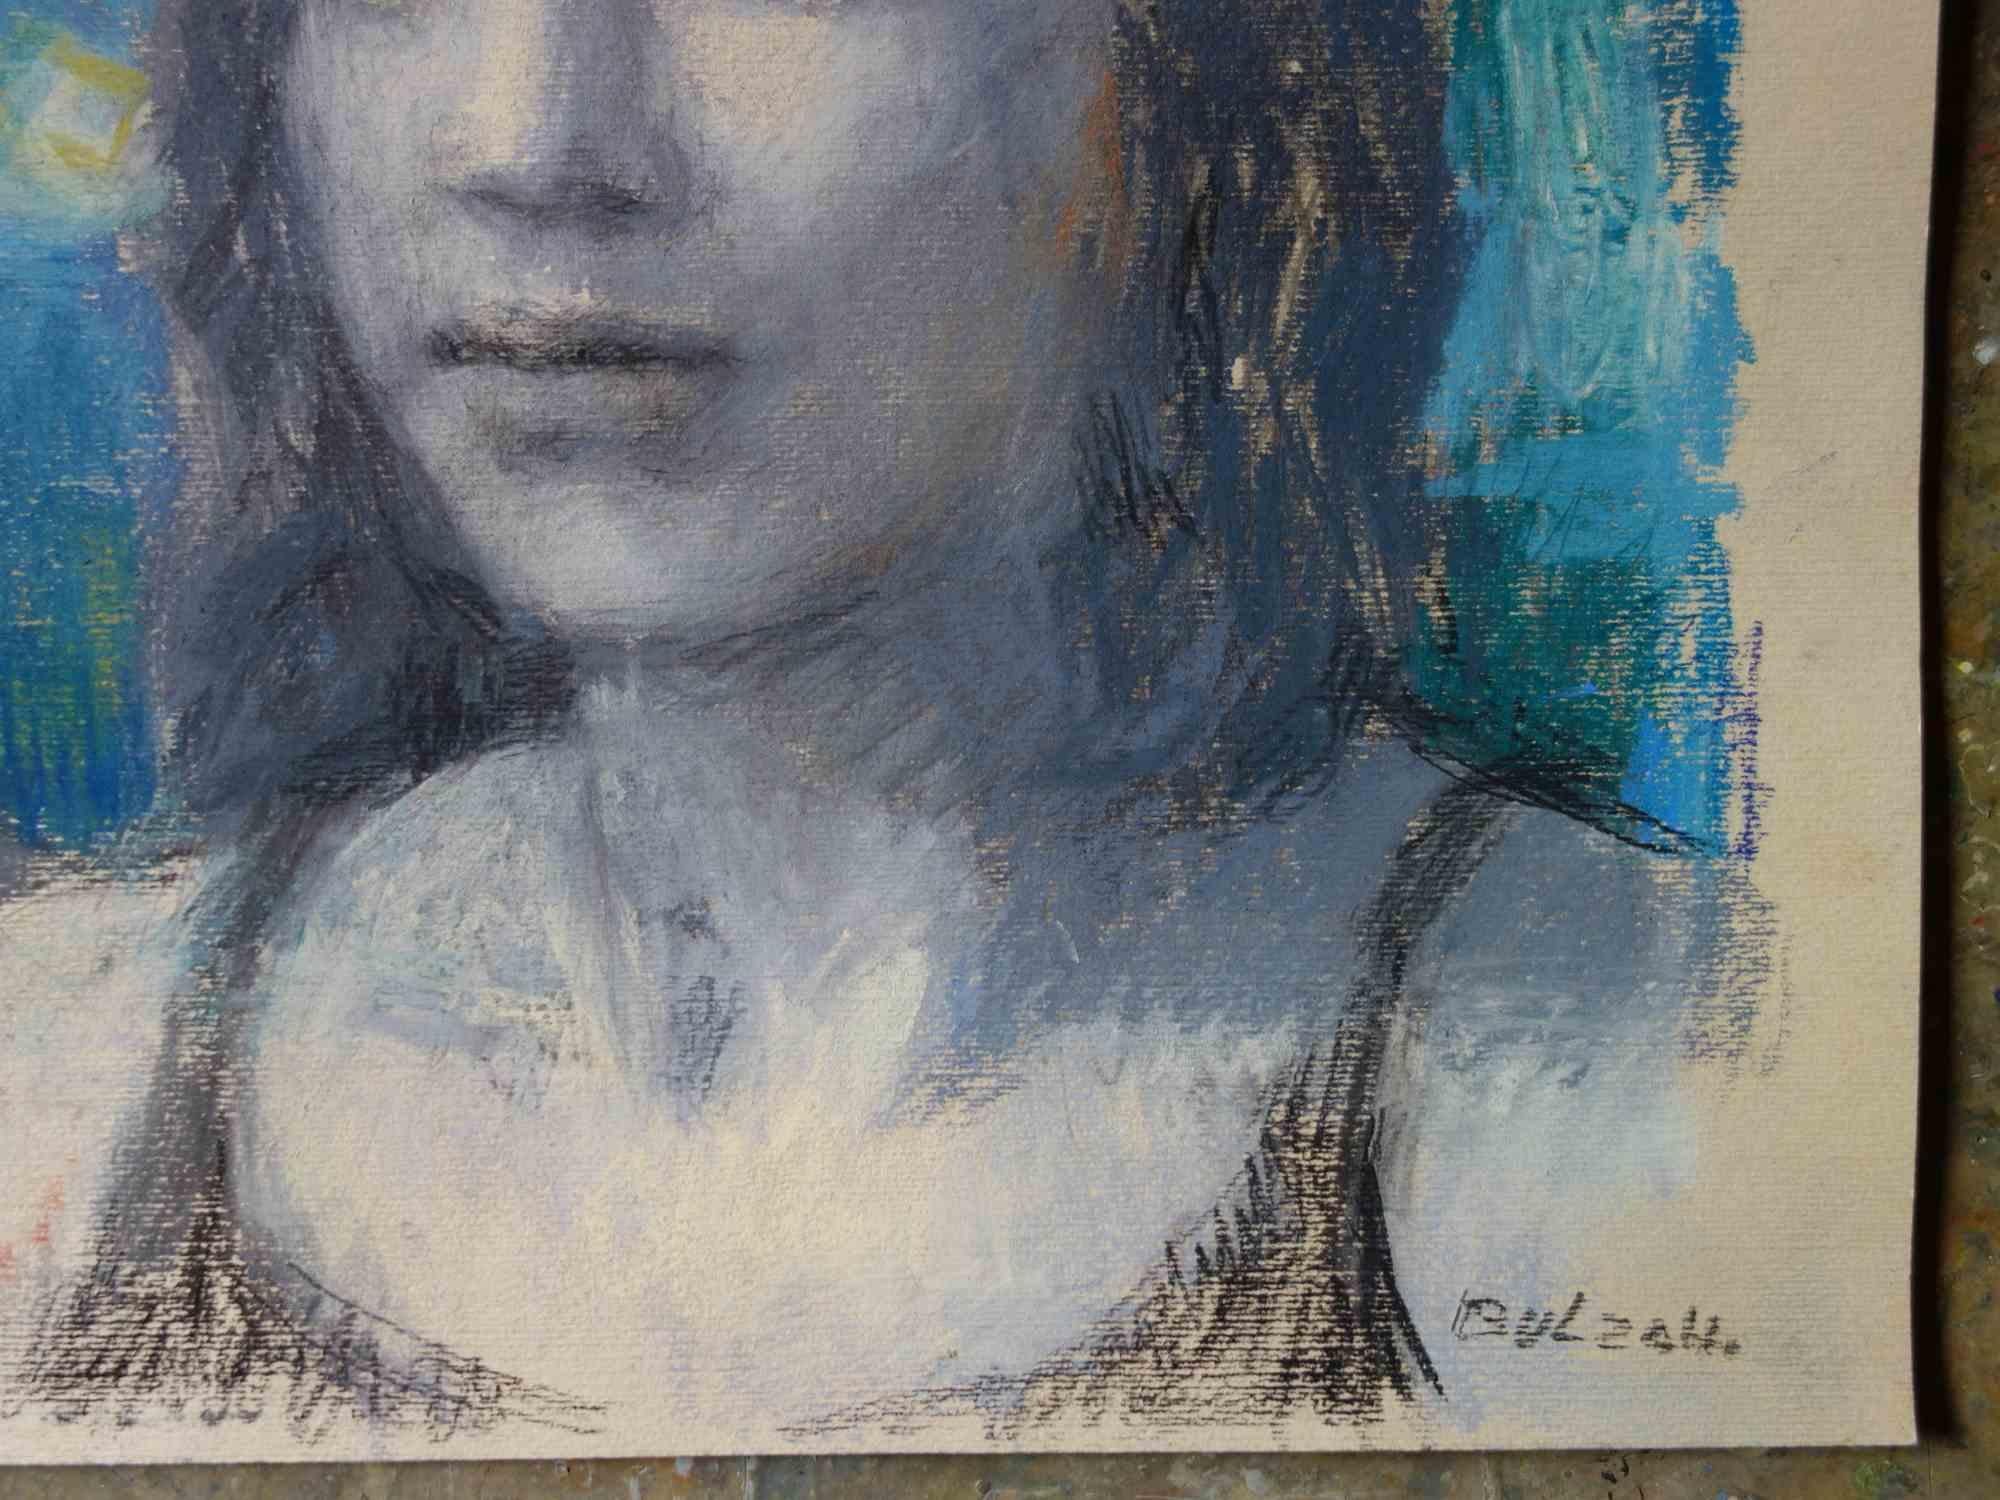 Due Donne is an original pastel drawing realized by the Italian contemporary artist Aurelio Bulzatti in 2019.
Unique authentic piece, hand-drawn and hand-signed by the artist.
The pastel is a half-bust portrait of two women within a city background.